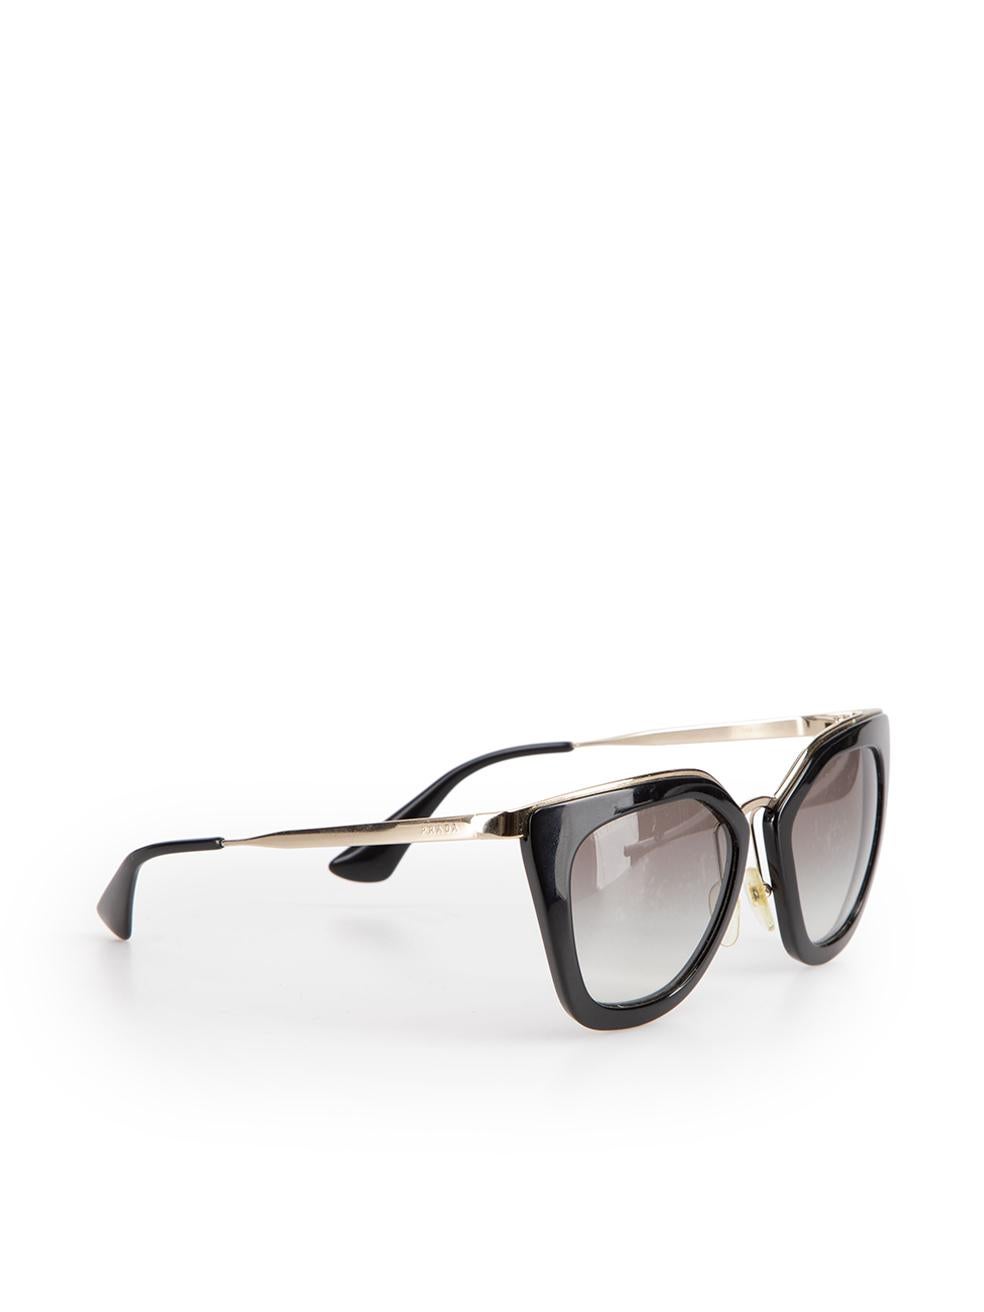 CONDITION is Very good. Minimal wear to sunglasses is evident. Minimal wear to the right arm with small scuff on this used Prada designer resale item. These sunglasses come in the original case and box.



Details


Black

Plastic

Oversized cat eye